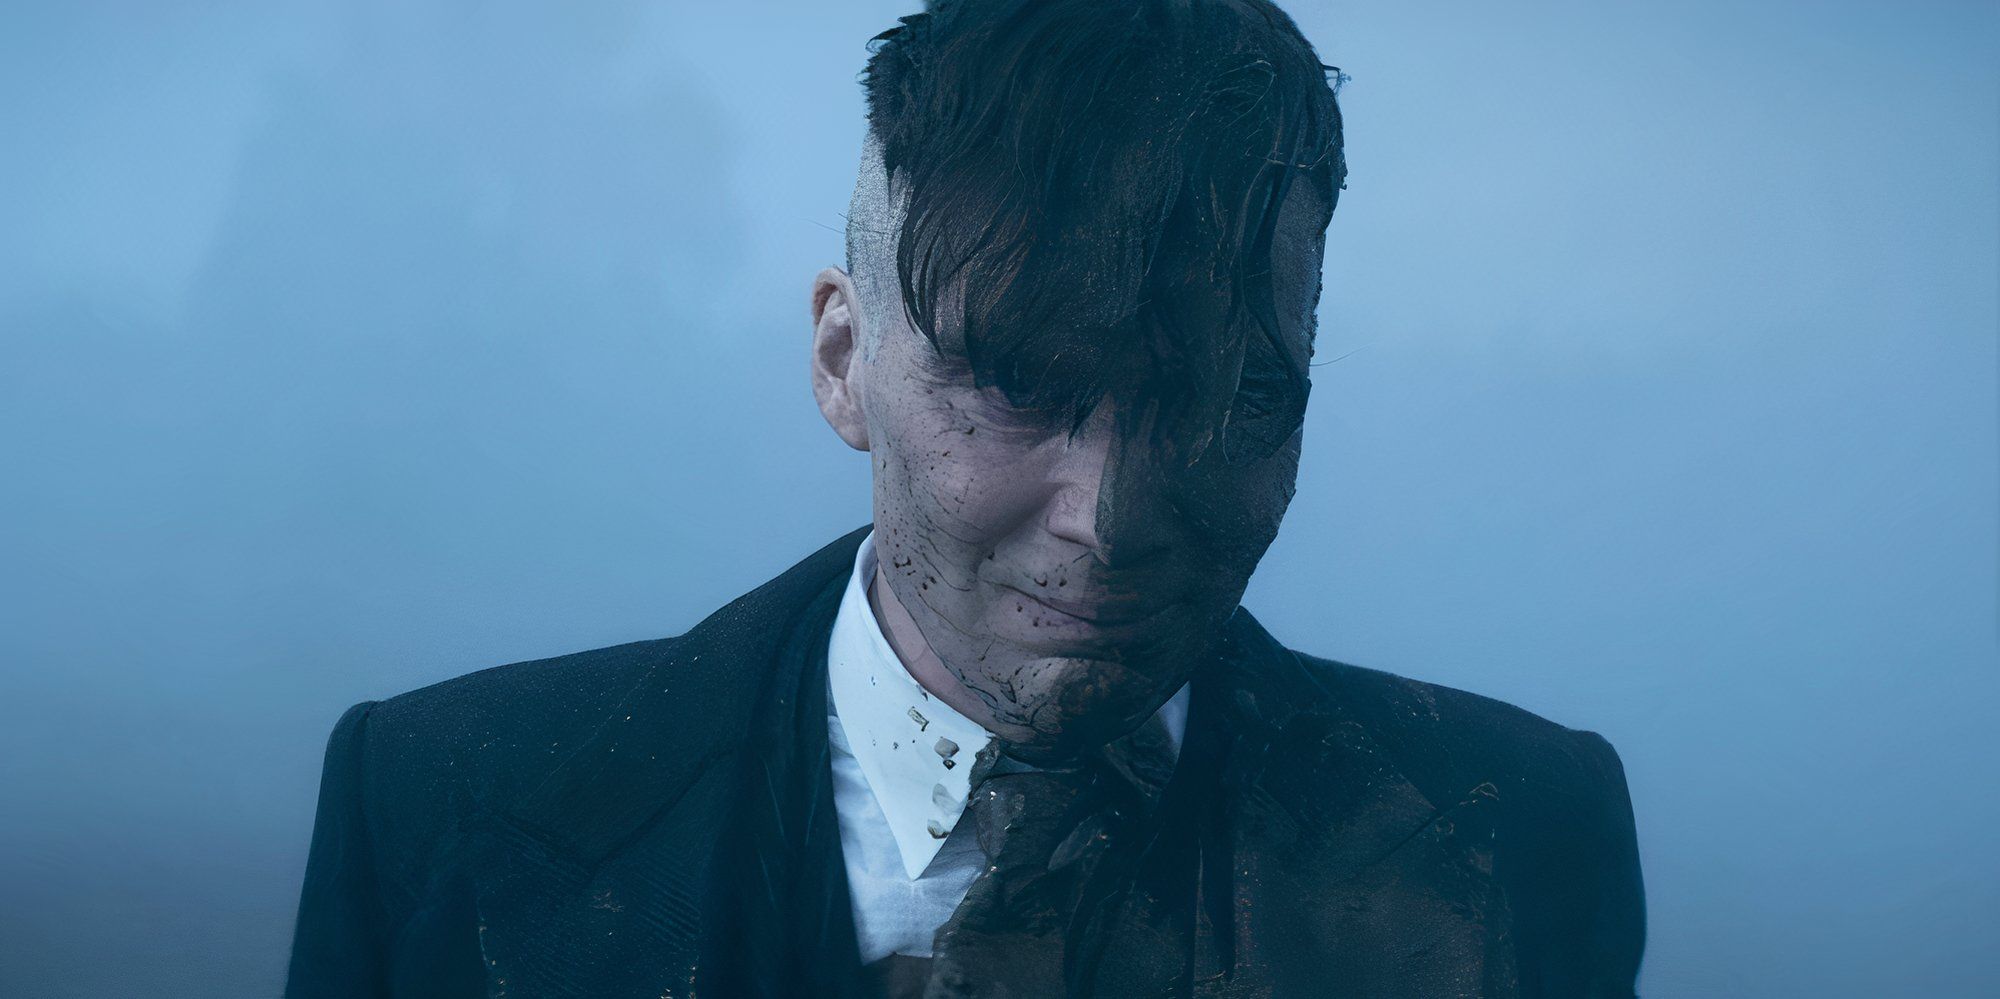 Cillian Murphy as Tommy Shelby with half his face covered in mud in Peaky Blinders.